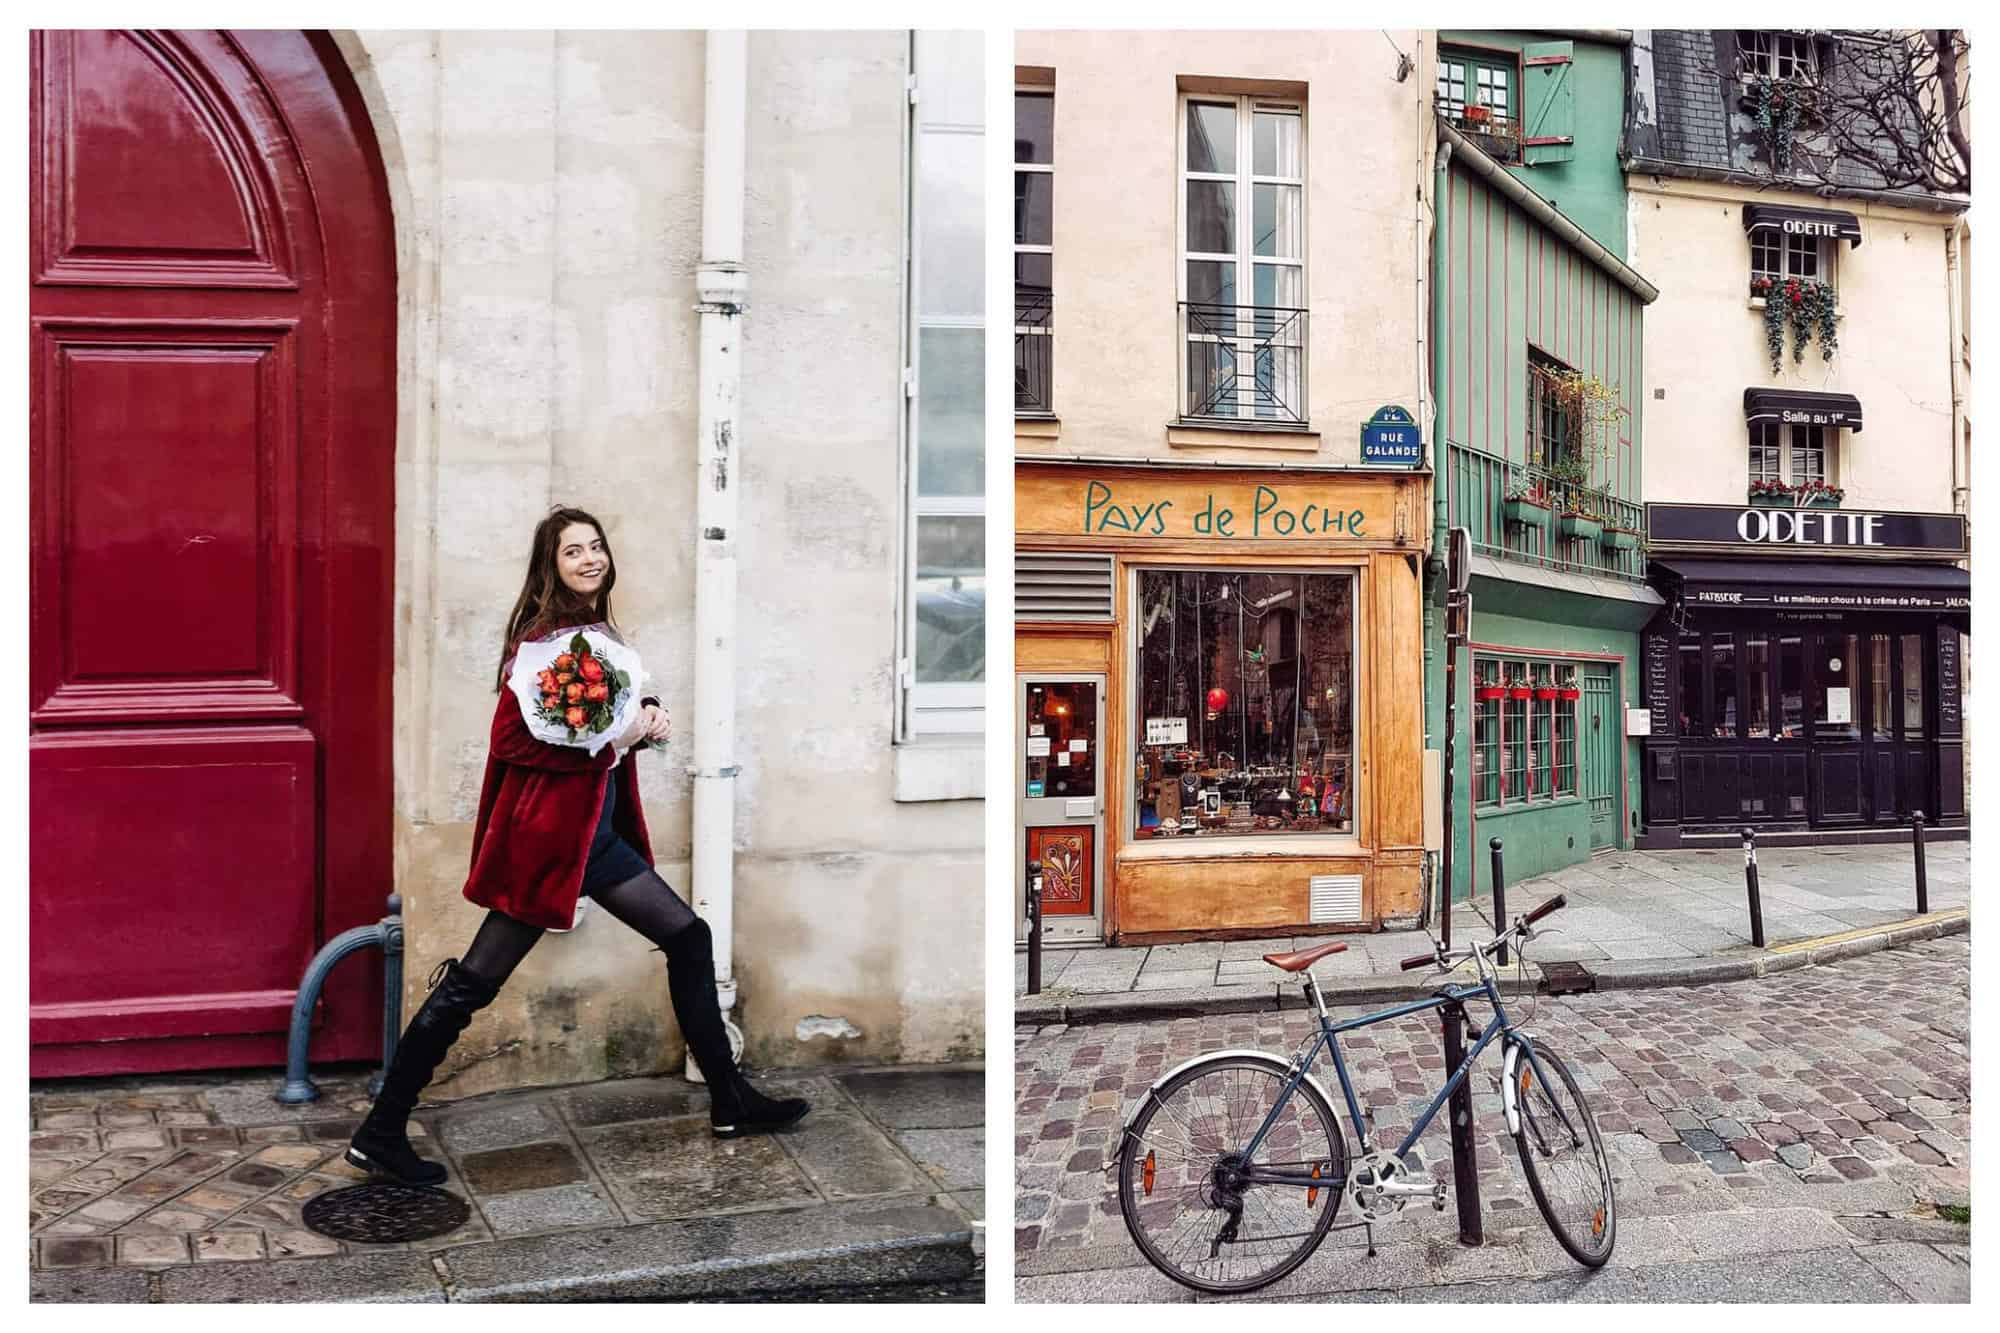 Left: A woman walks up a street in Paris. Behind her there is a red door. She is wearing a red coat, black tights and black thigh high boots. She is carrying red and orange roses and is looking back at the camera. Right: A street in Paris. There are a few storefronts, with the signs “Odette” and “Pays de Poche” visible. There is a bike locked to a post on the street. 